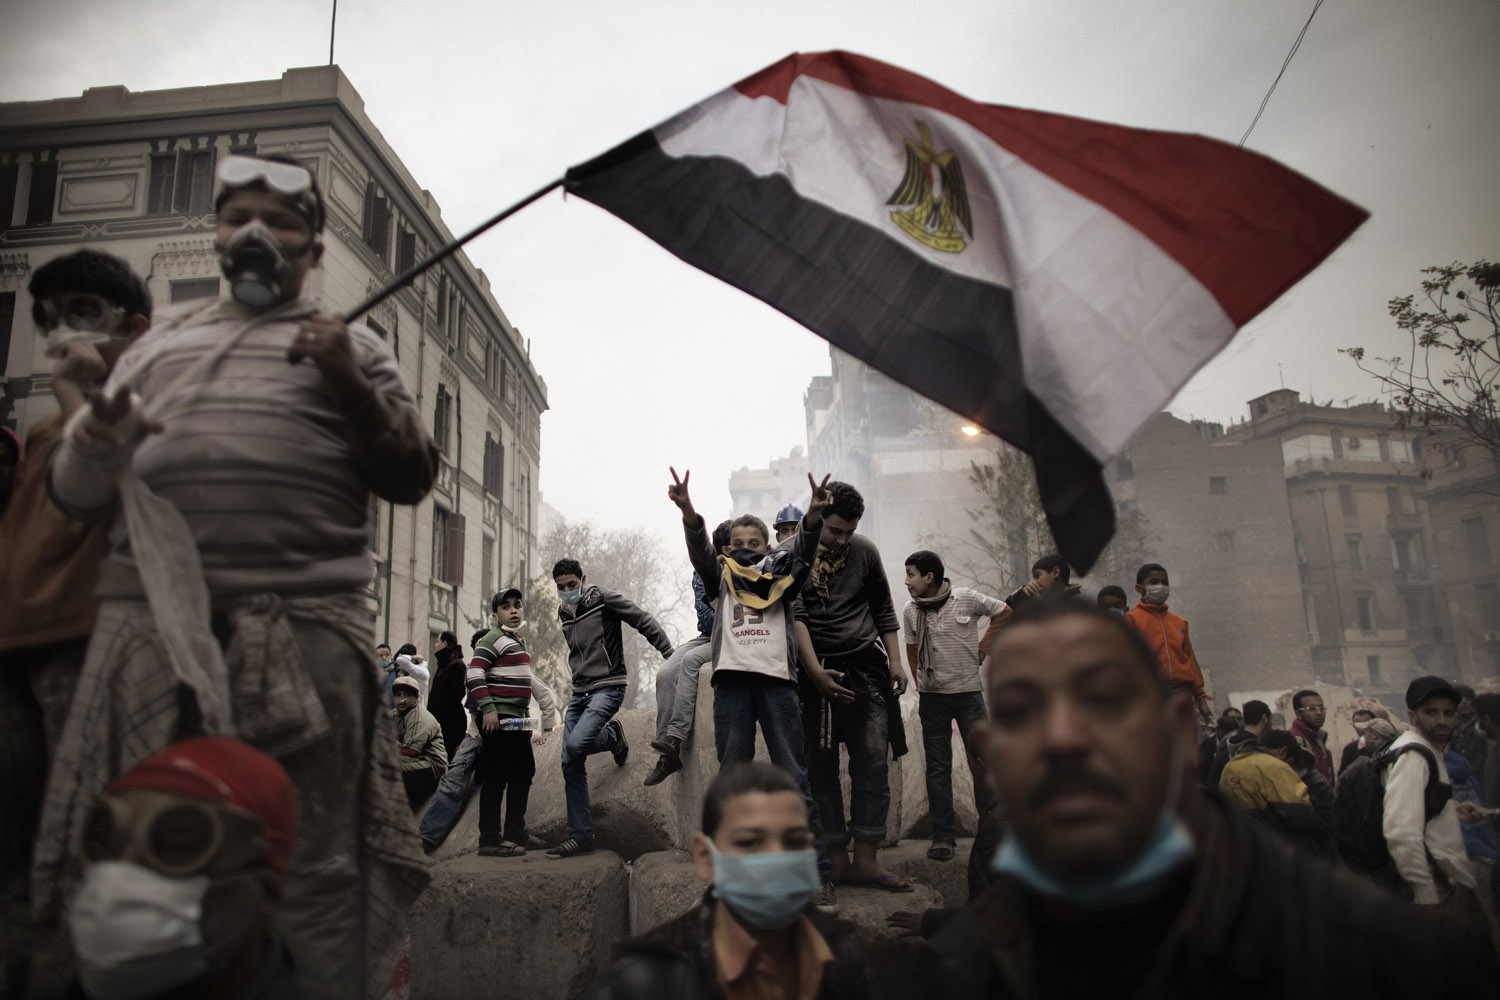 Feb. 6, 2012. Egyptian demonstrators gather next to a concrete barricade during confrontations outside Cairo's security headquarters. Clashes continued in the wake of deadly football violence in Port Said amid calls by activists for civil disobedience.